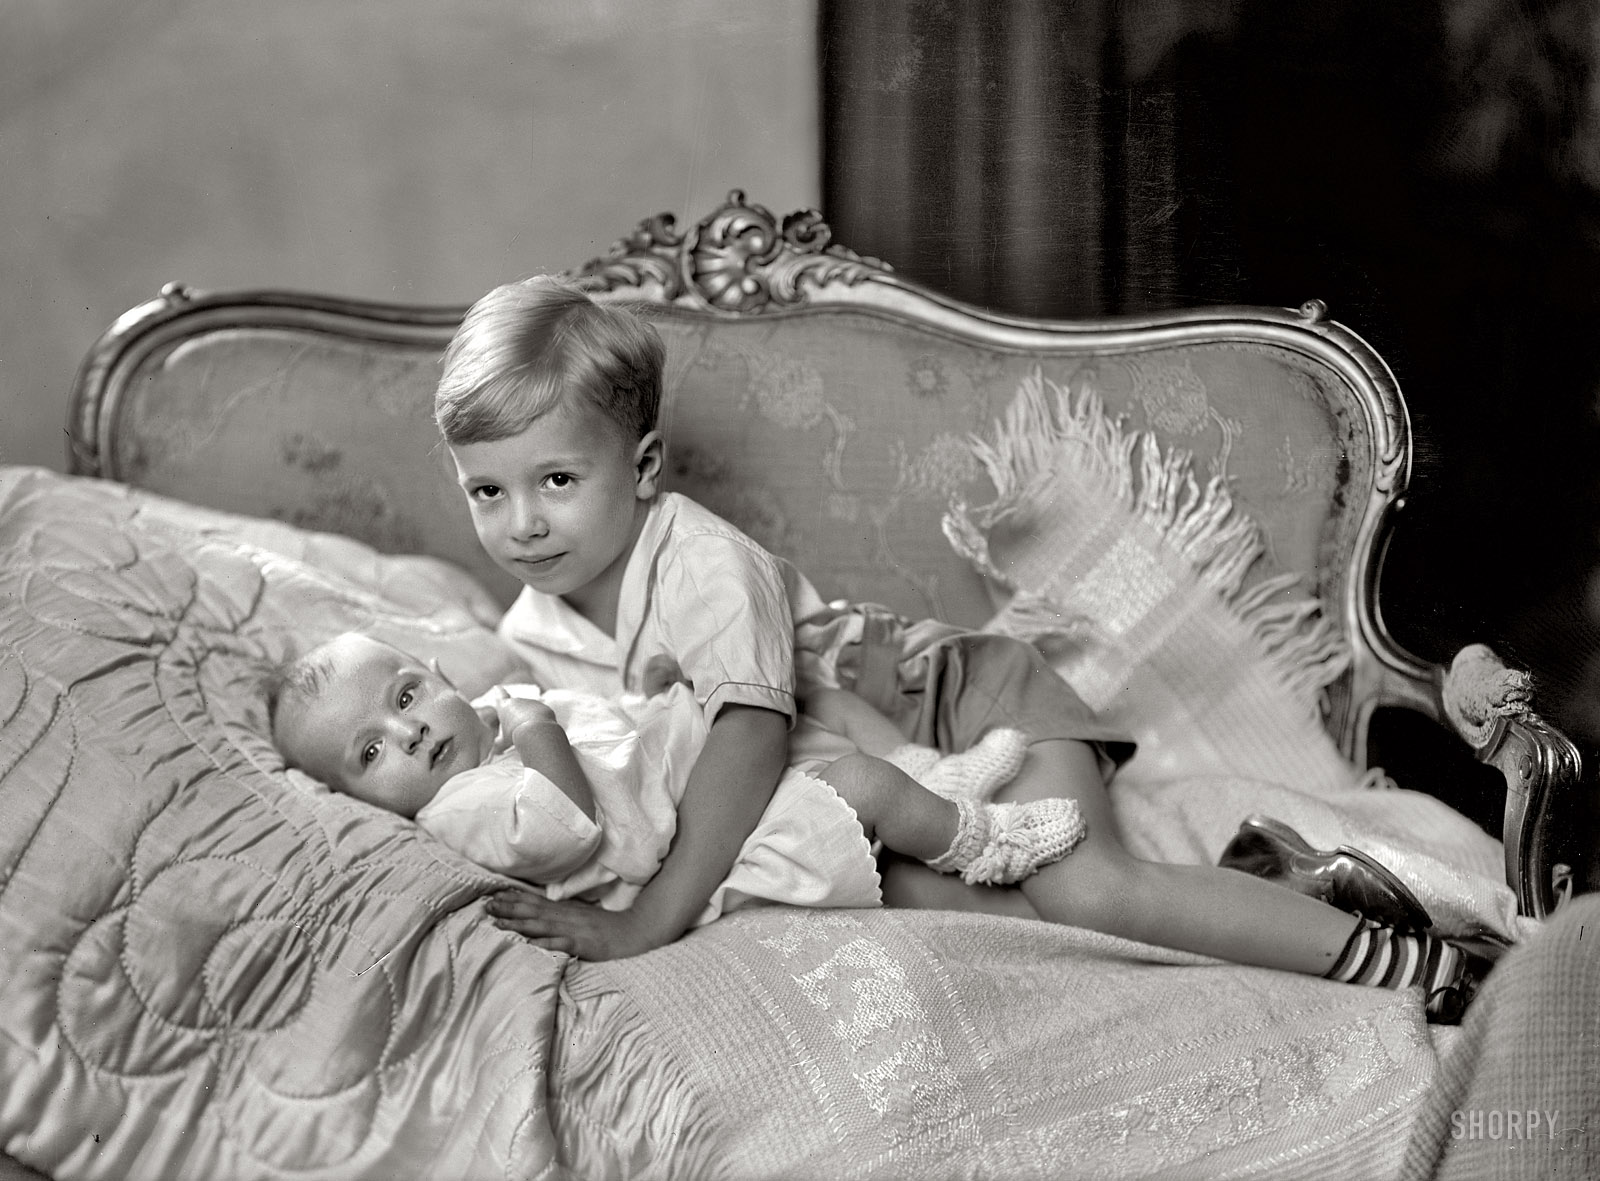 Washington, D.C., 1933. "Robert Haller children." An unidentified Haller tot with equally anonymous Big Brother.  Harris & Ewing glass negative. View full size.